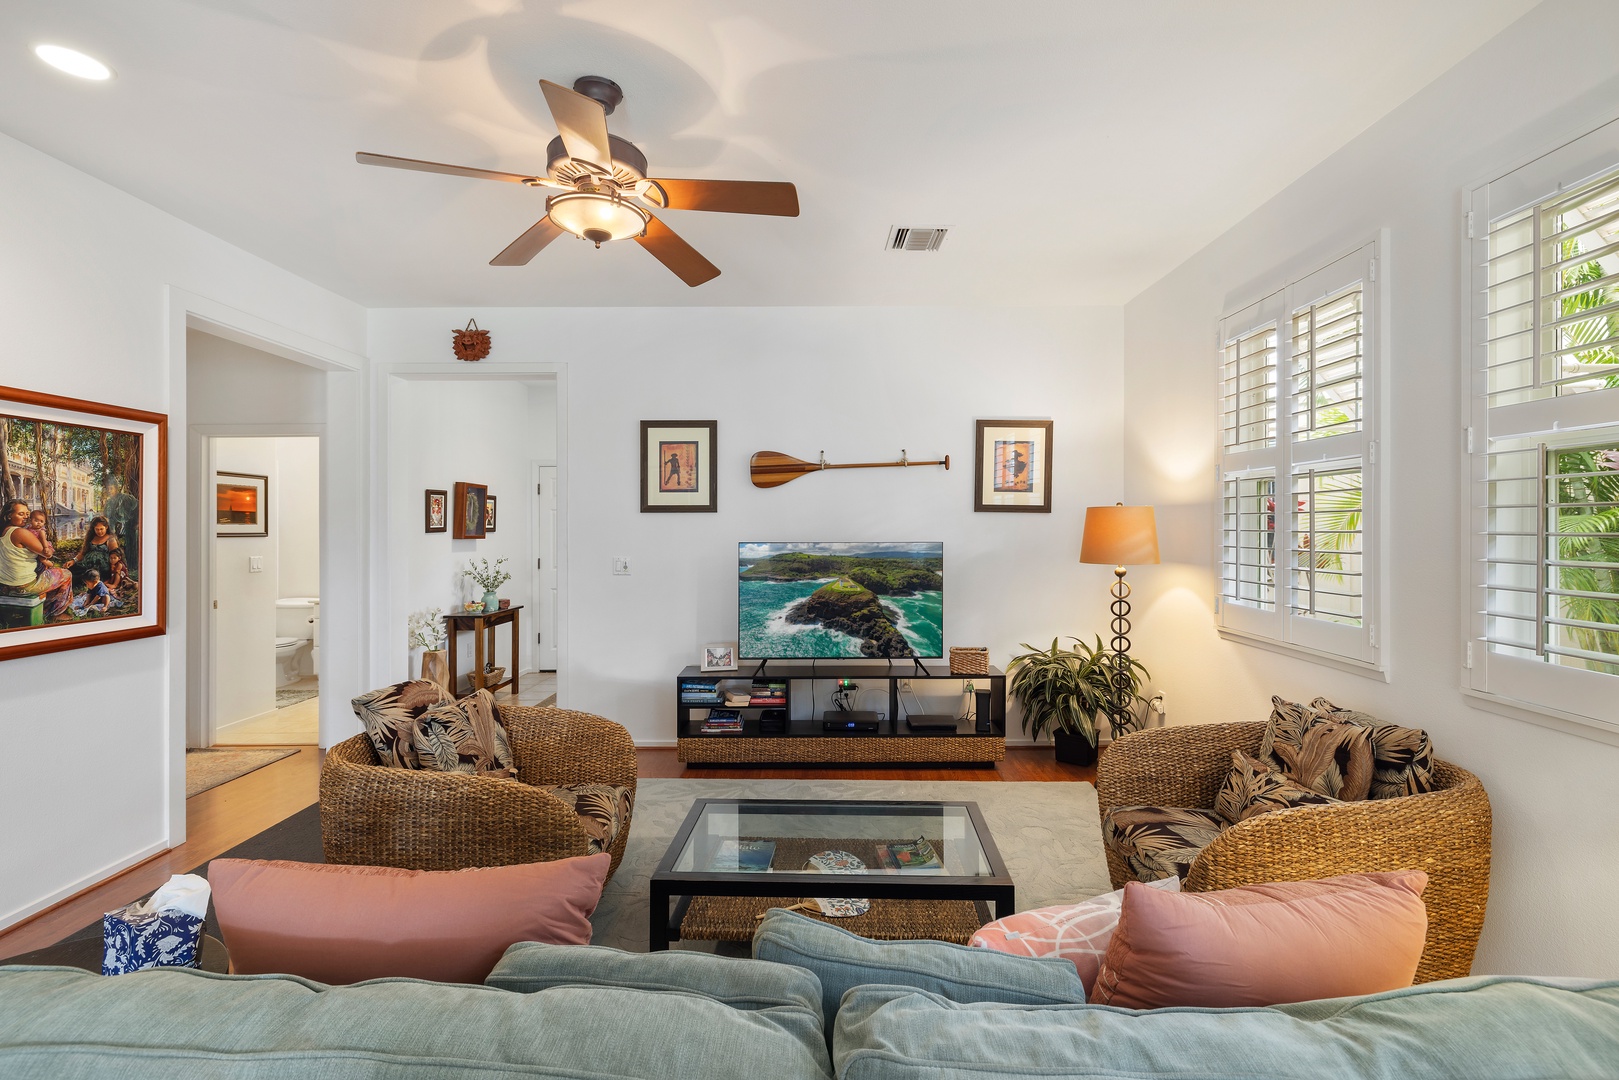 Kapolei Vacation Rentals, Coconut Plantation 1190-1 - The living area has a flat-screen TV, plush seating and central AC.